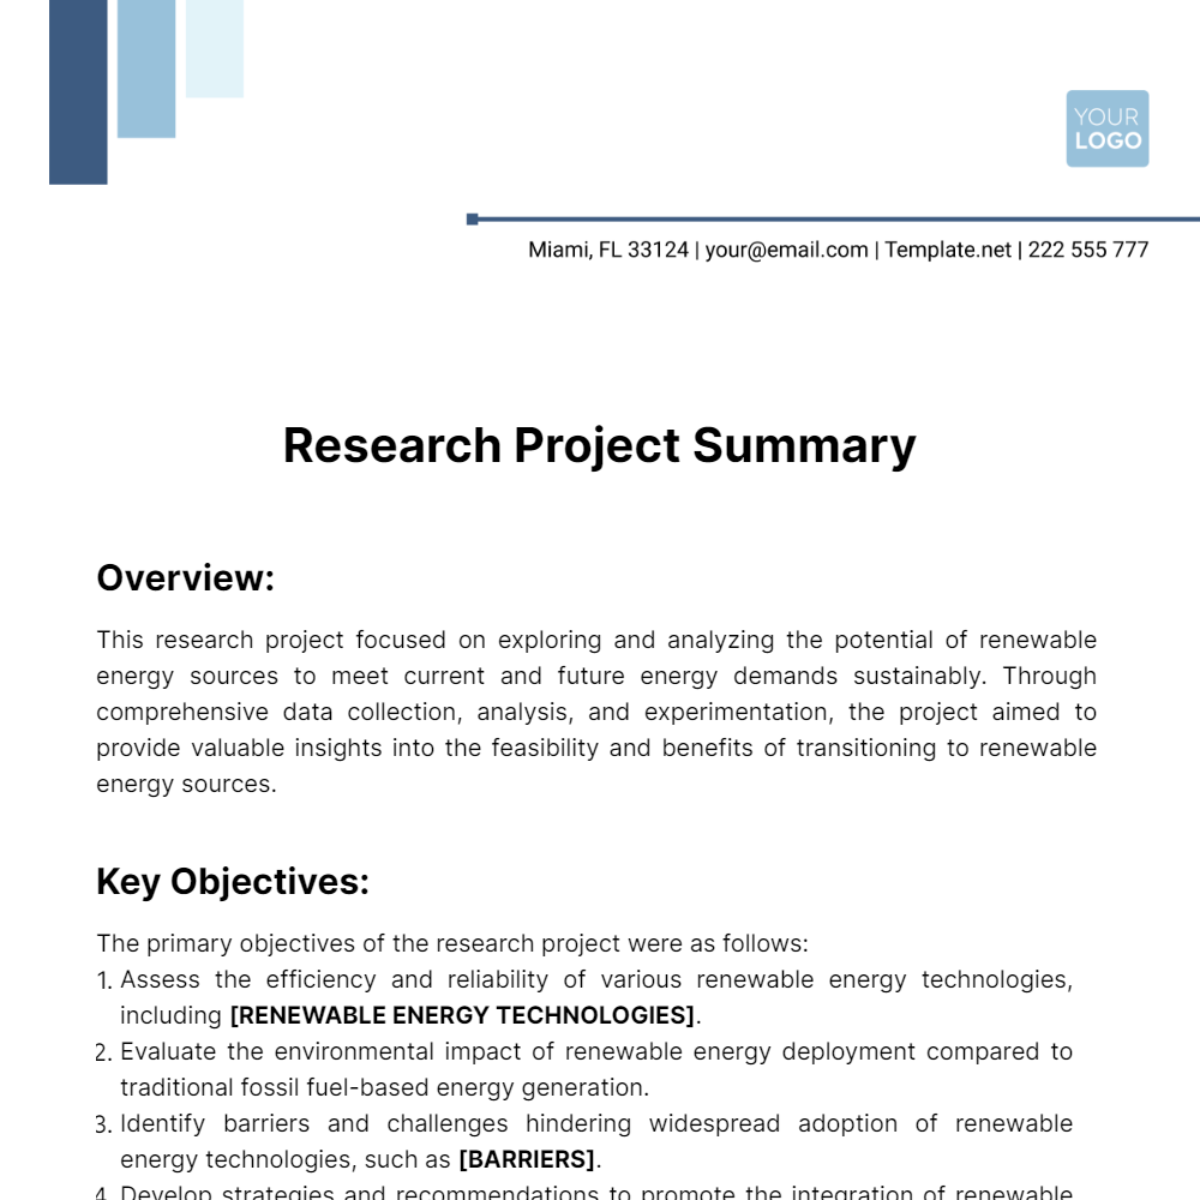 Research Project Summary Template